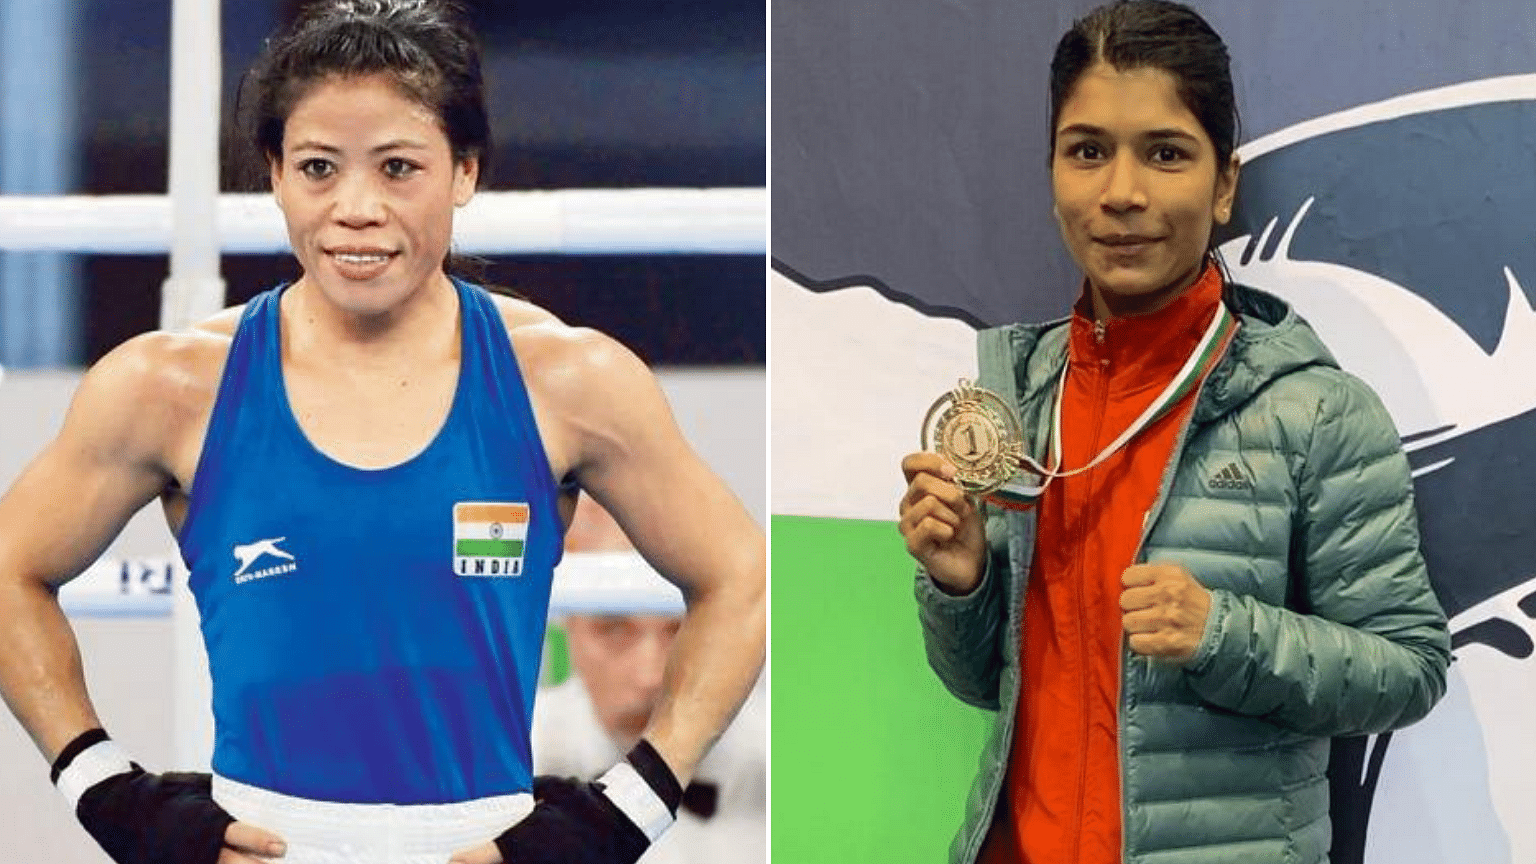 Mary Kom (left) and Nikhat Zareen participated in the trials in the national capital in December last year where Mary won 9-1.